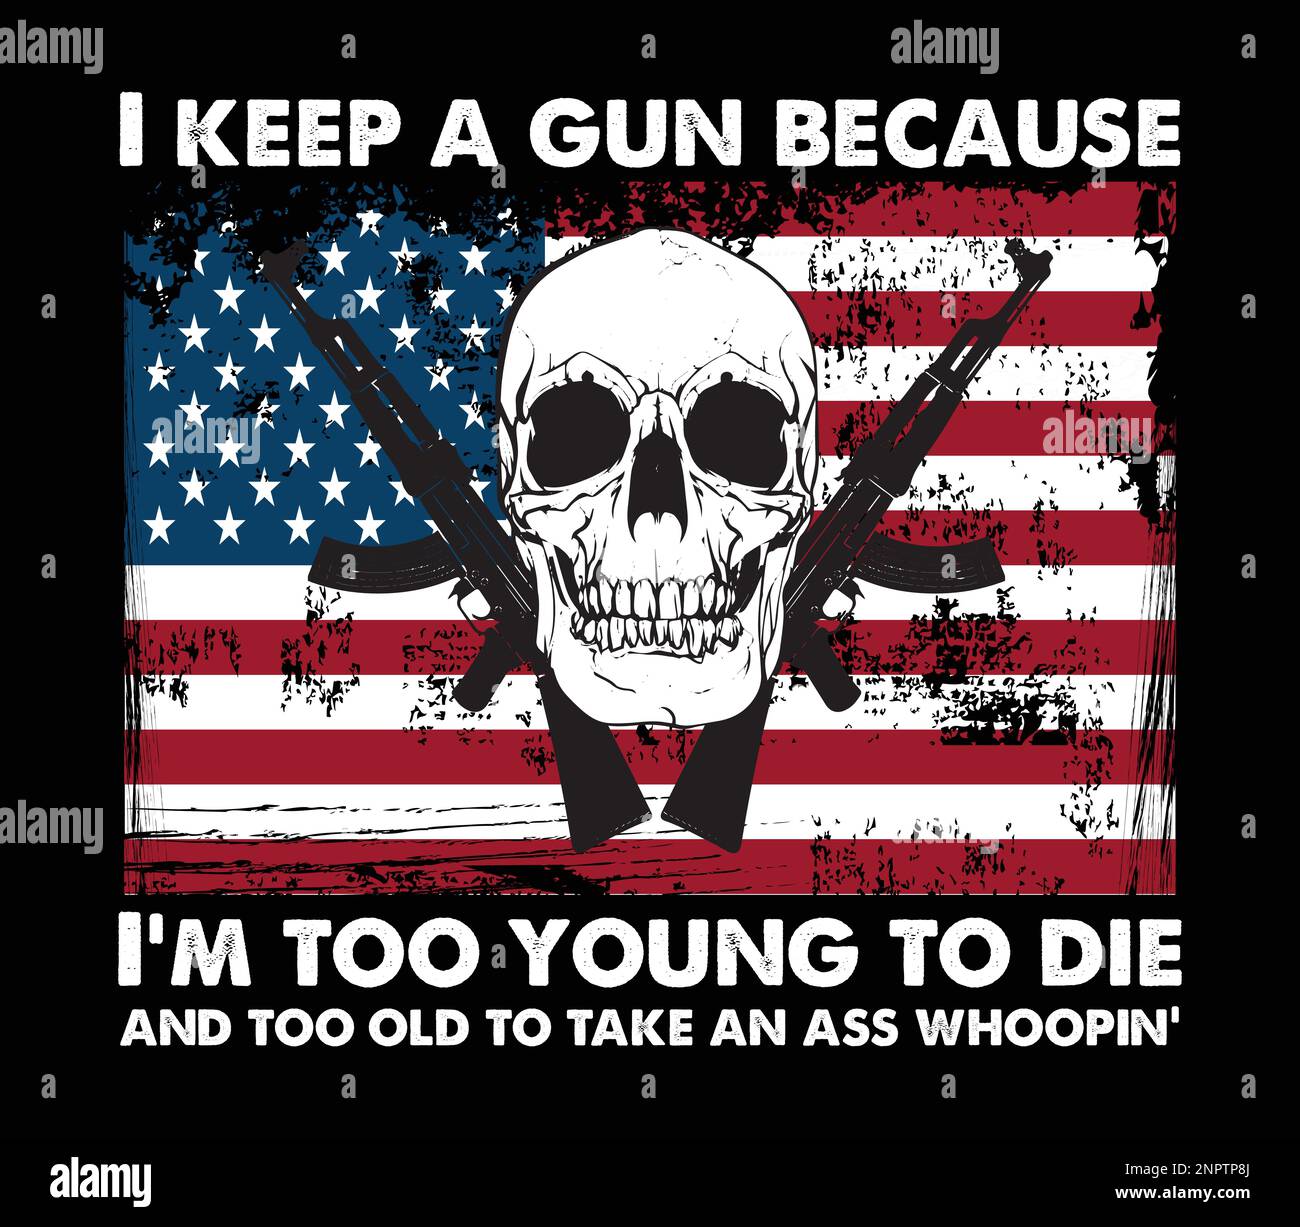 USA Gun lover grungy t-shirt design with USA flag, guns and skull. I keep a gun because I am too young to die. Stock Vector